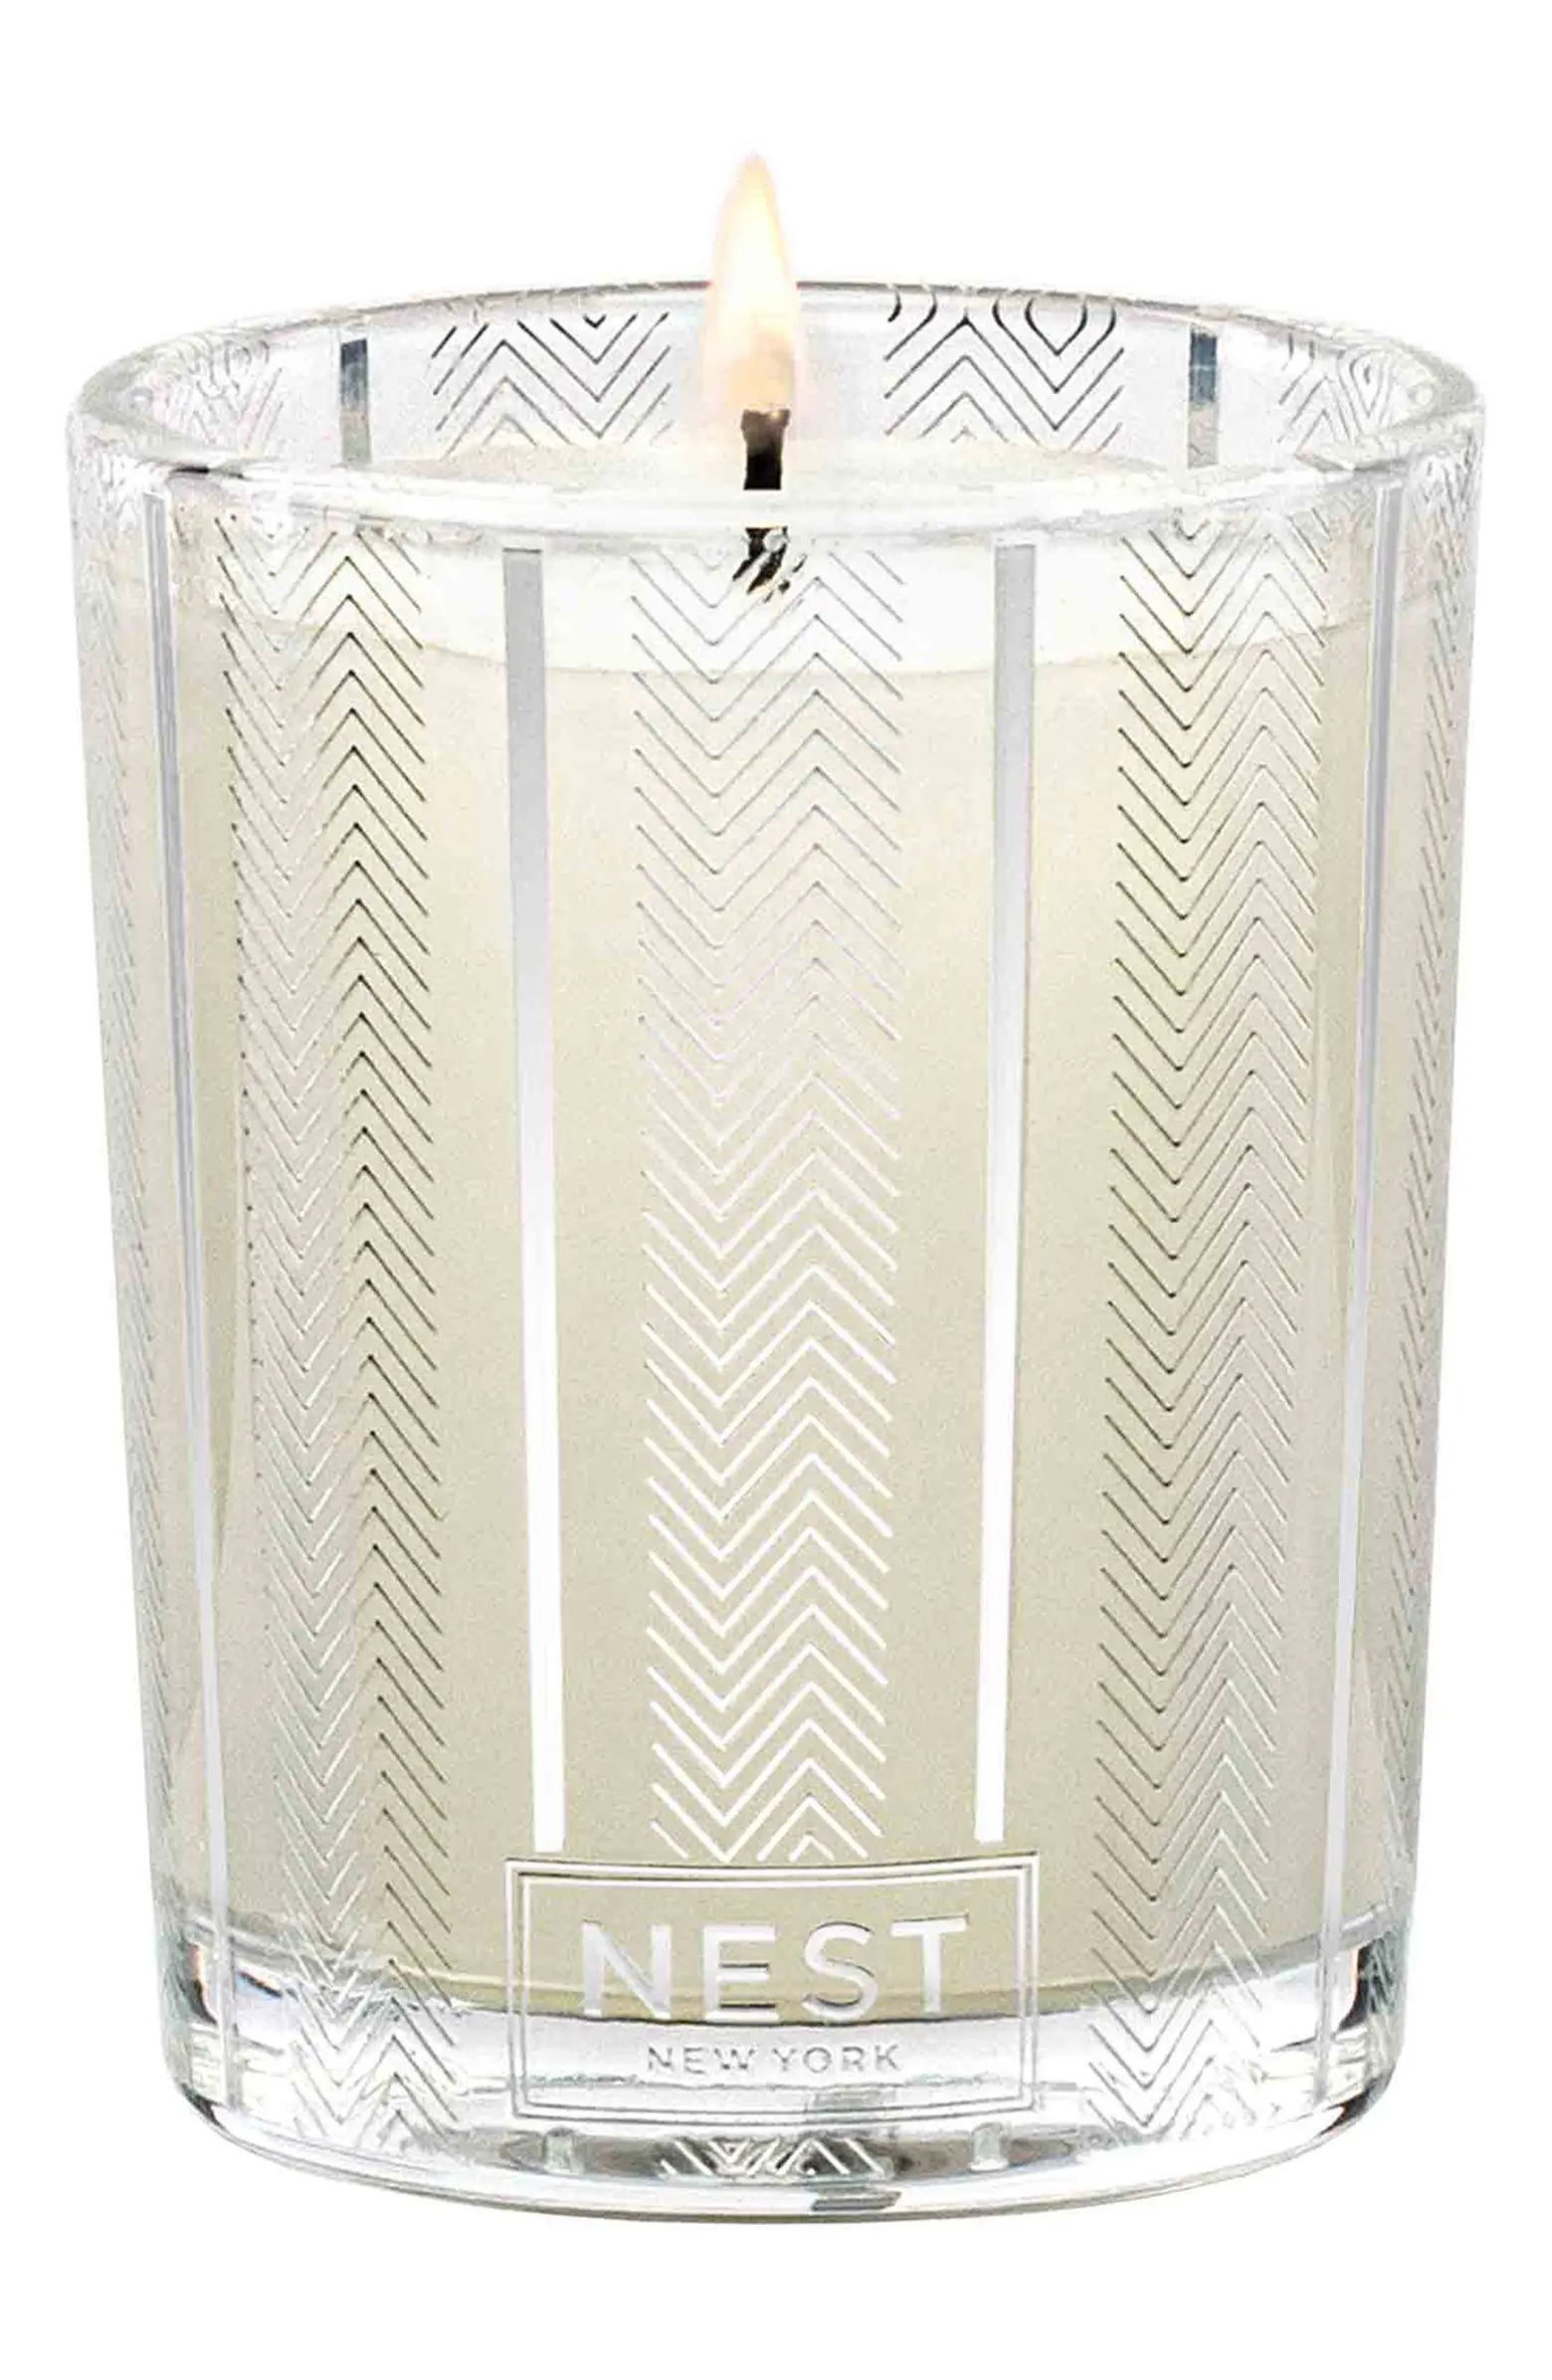 NEST Fragrances Blue Cypress & Snow Scented Classic Candle | Nordstrom